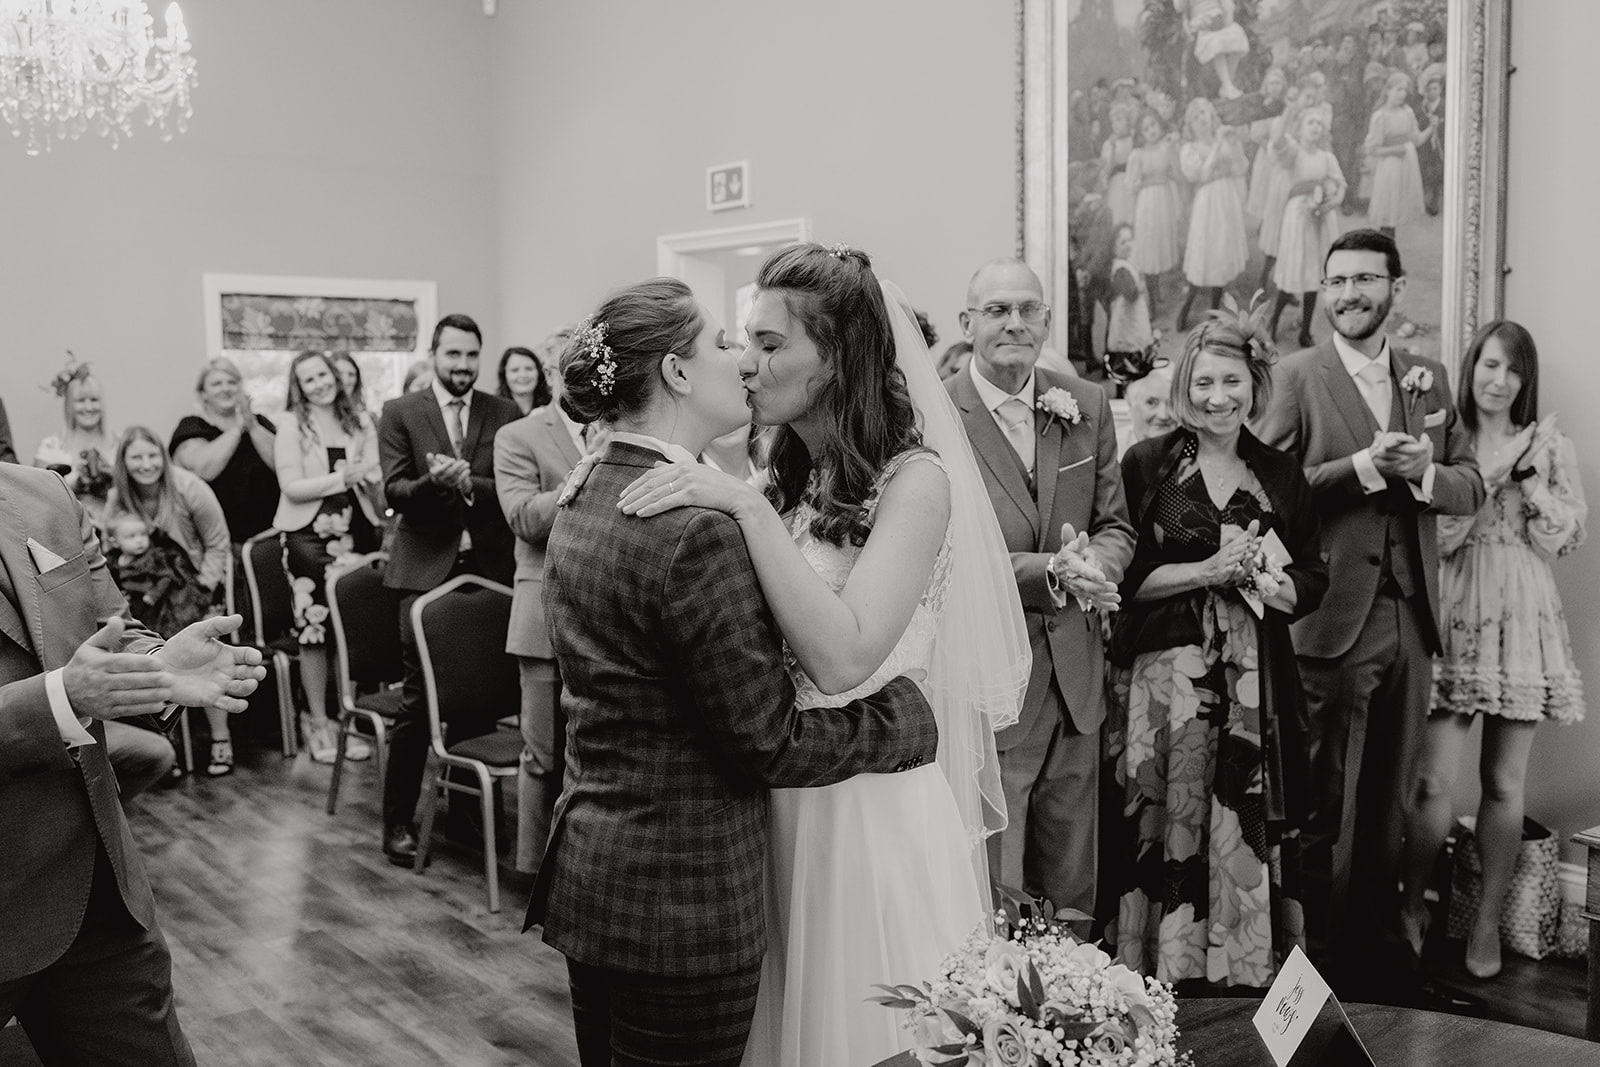 The Brewhouse & Kitchen Wedding Photography - the two brides kissed during their wedding ceremony